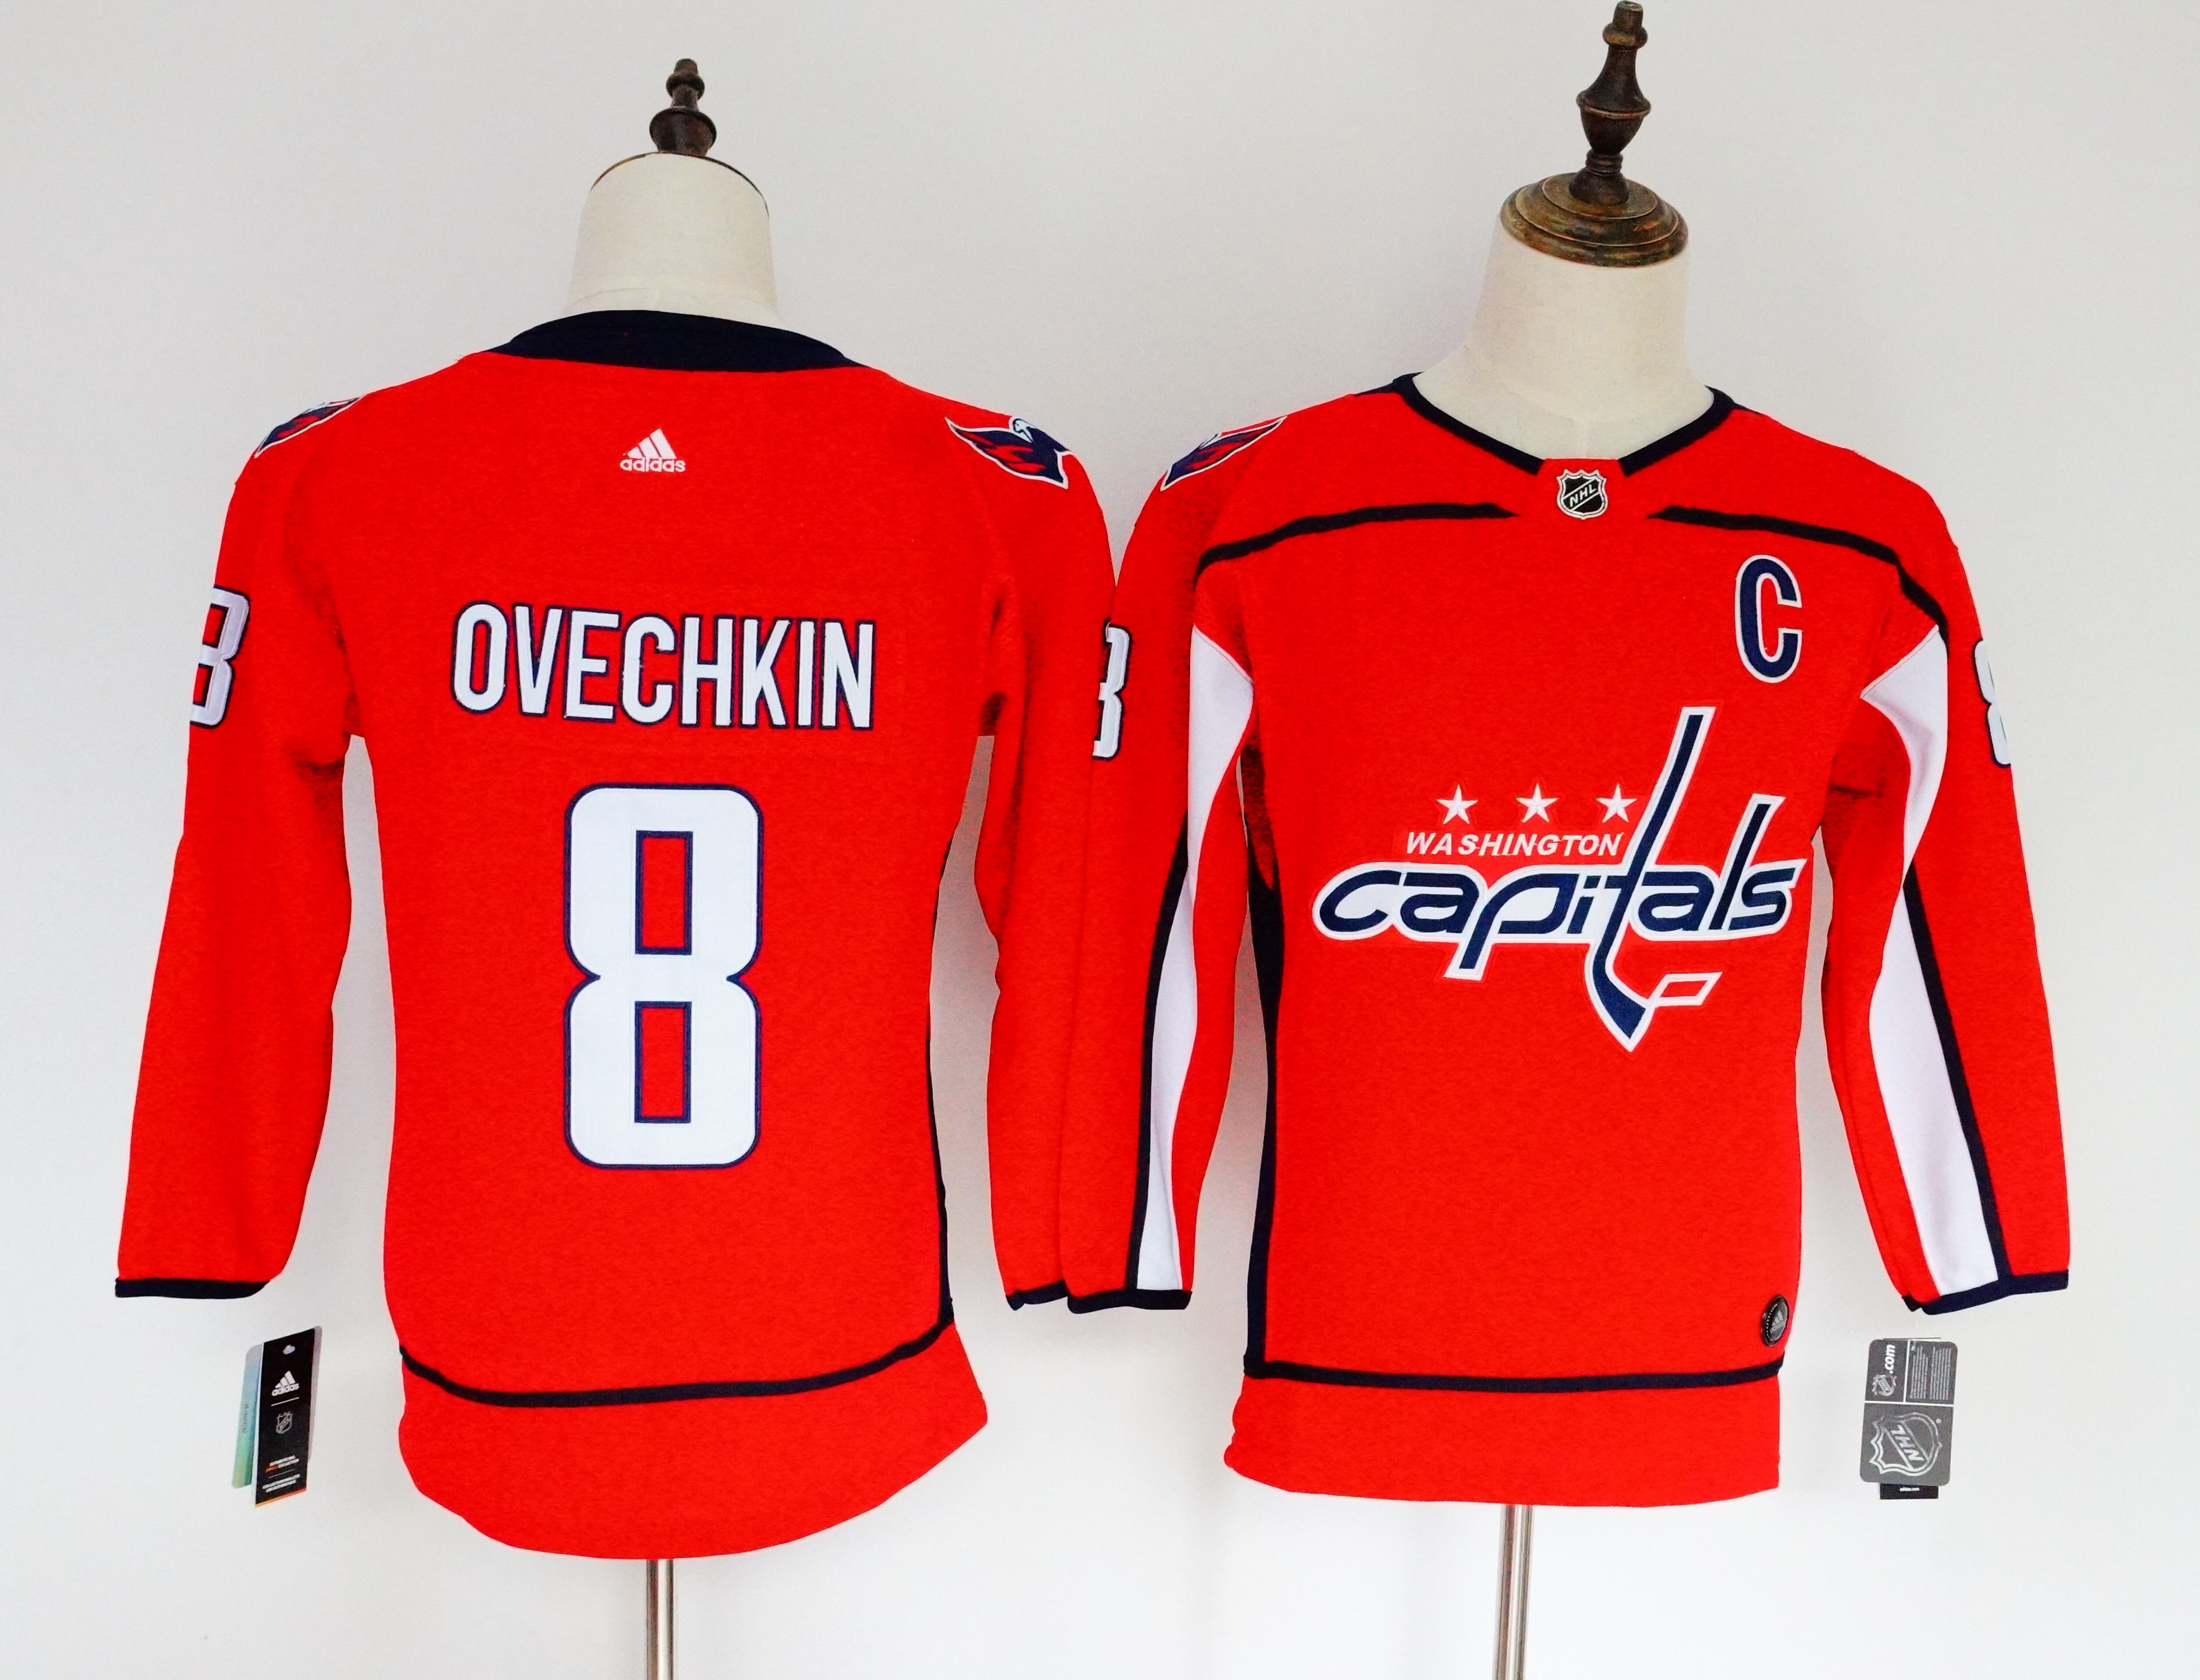 Capitals 8 Alexander Ovechkin Red Youth Adidas Jersey